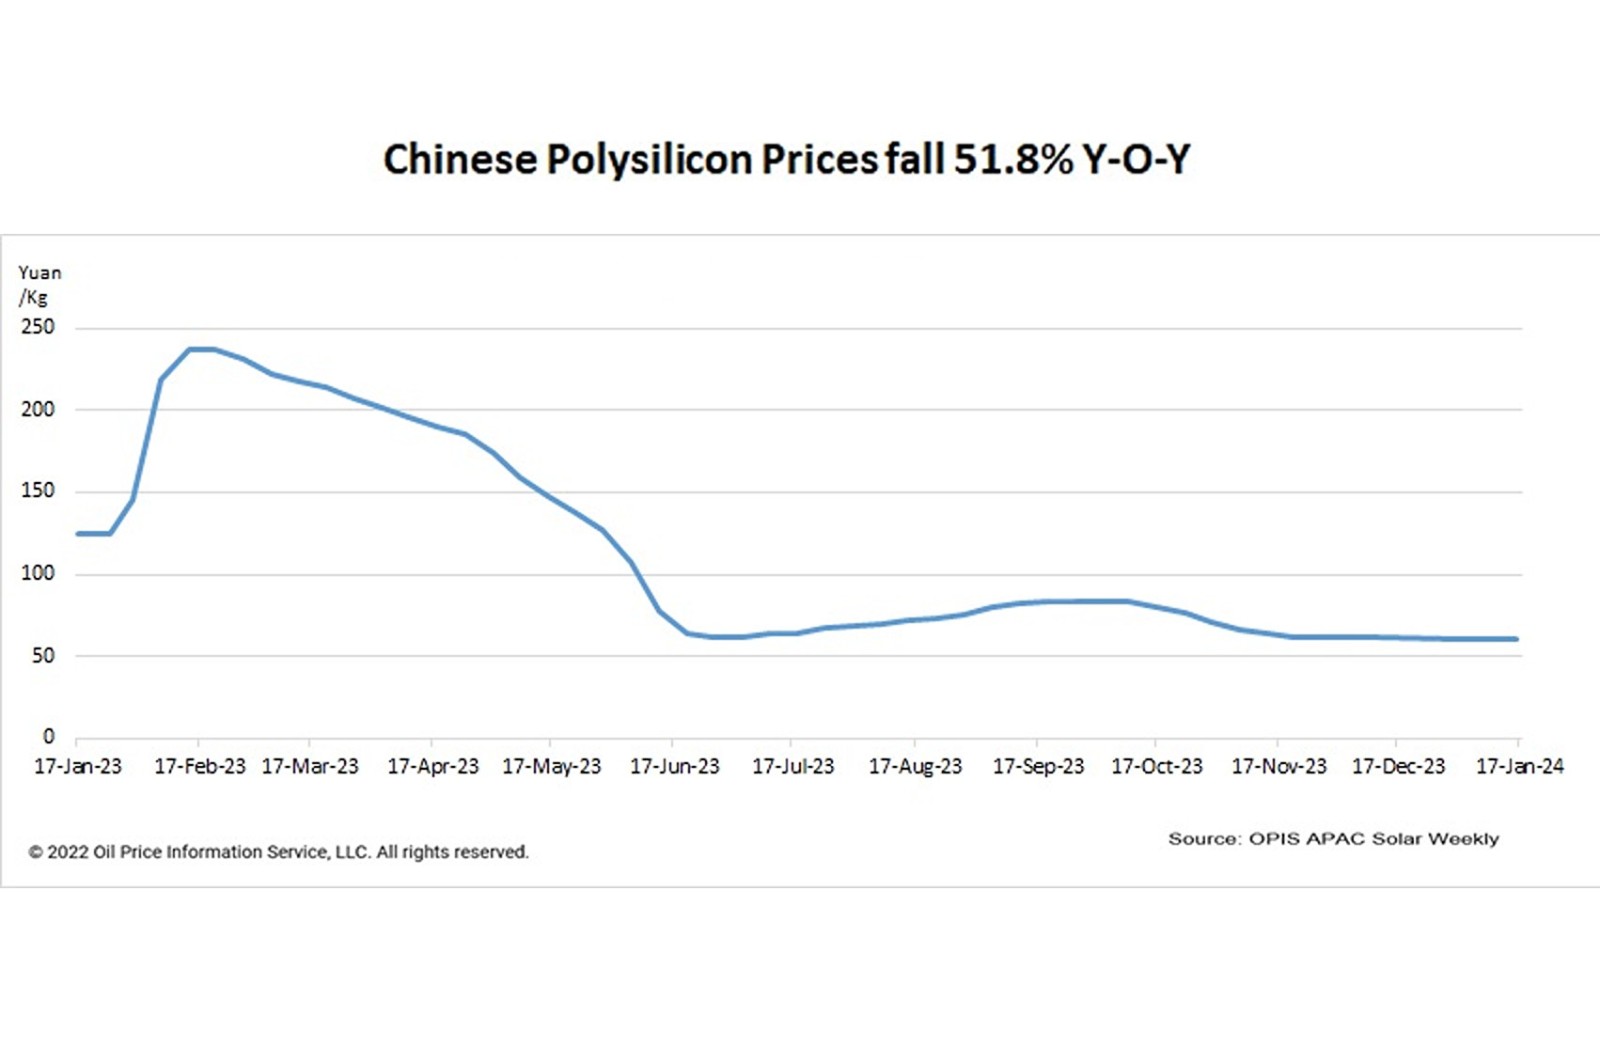 China polysilicon prices fall 51.8% year-on-year amid supply glut